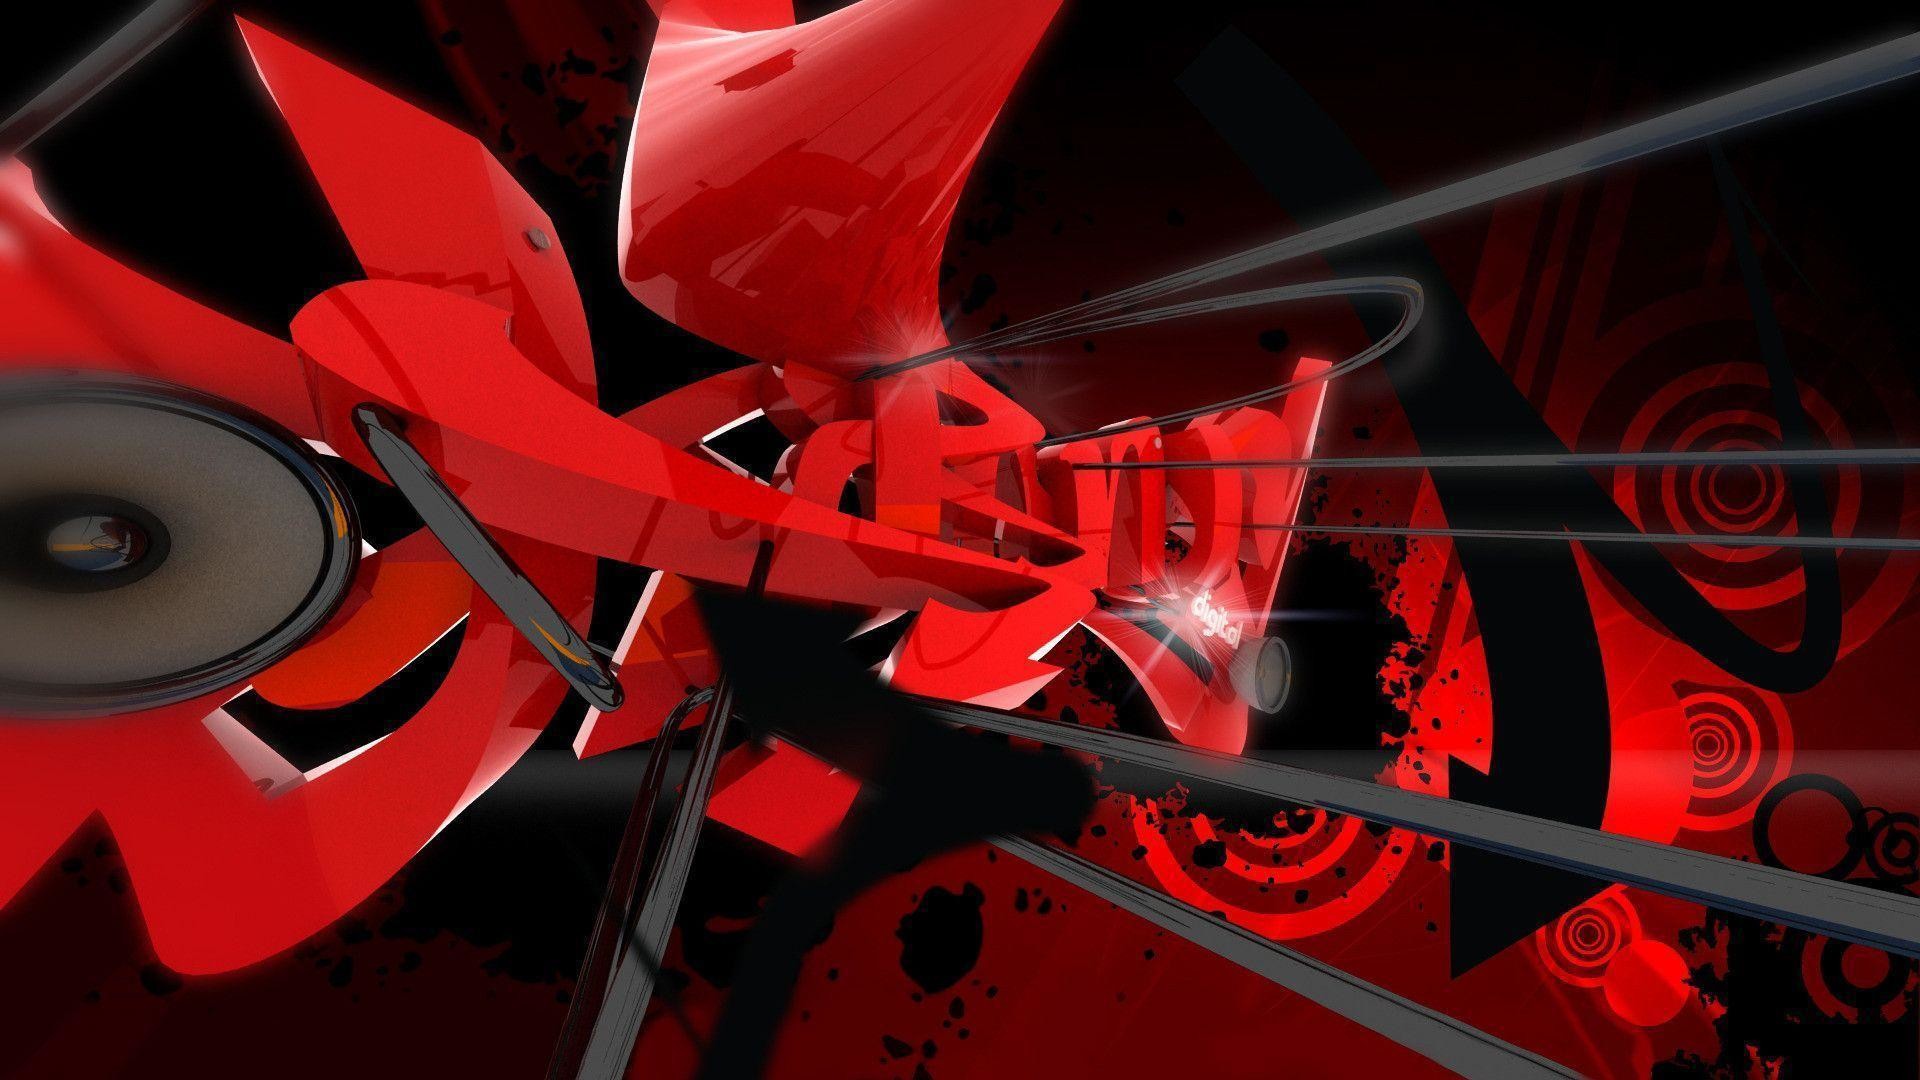 1920x1080, Black And Red Graffiti Wallpaper - Black And Red Hip Hop -  1920x1080 Wallpaper 